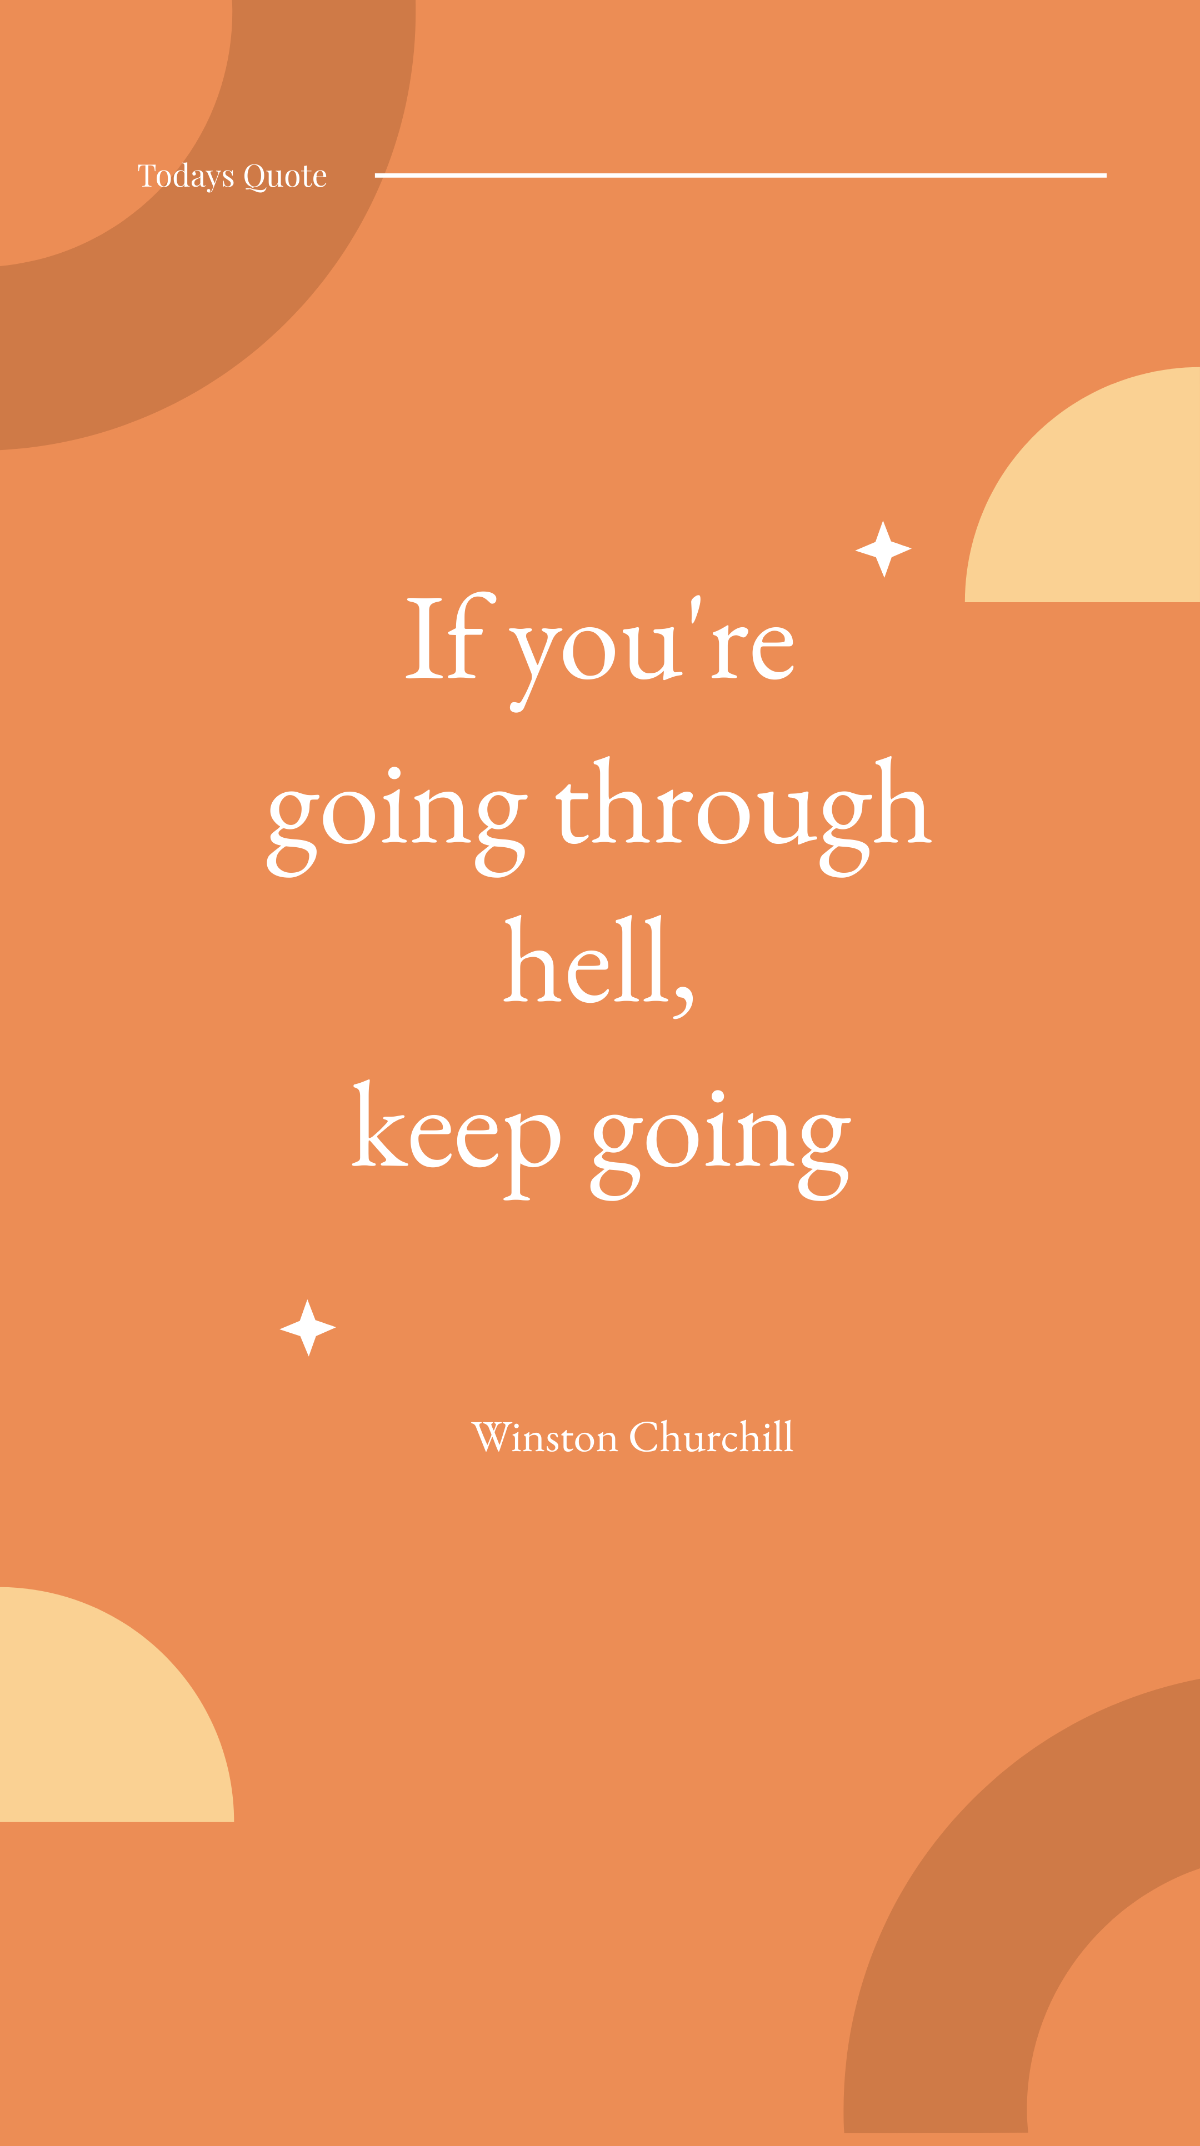 Winston Churchill - If you're going through hell, keep going Template